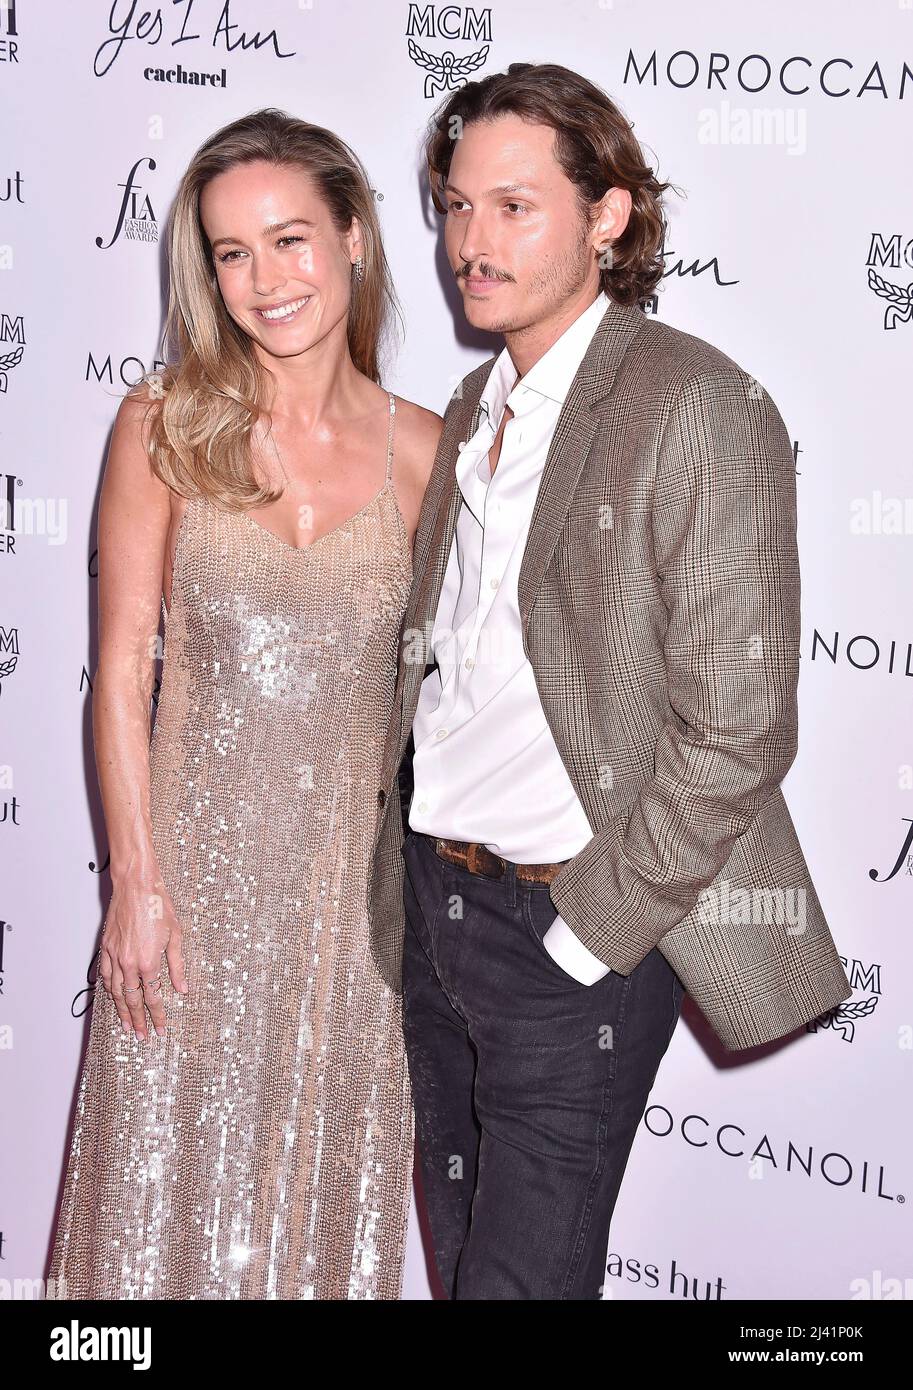 Beverly Hills, Ca. 10th Apr, 2022. (L-R) Brie Larson and Elijah Allan-Blitz attend The Daily Front Row's 6th Annual Fashion Los Angeles Awards at Beverly Wilshire, A Four Seasons Hotel on April 10, 2022 in Beverly Hills, California. Credit: Jeffrey Mayer/Jtm Photos/Media Punch/Alamy Live News Stock Photo